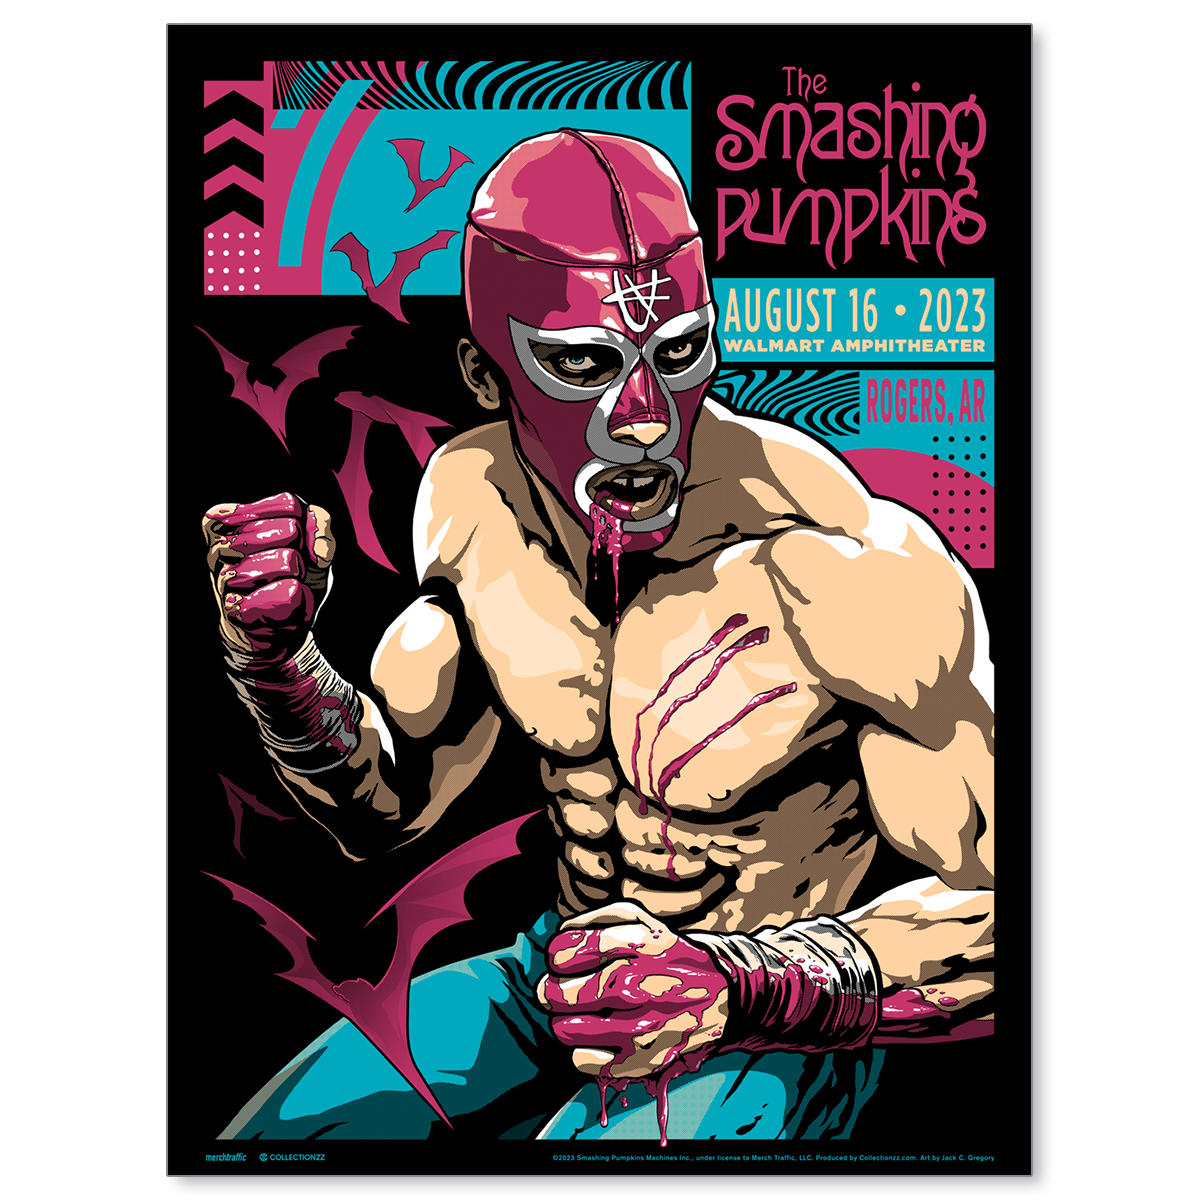 The Smashing Pumpkins Rogers August 16, 2023 Poster & Setlist Trading Card